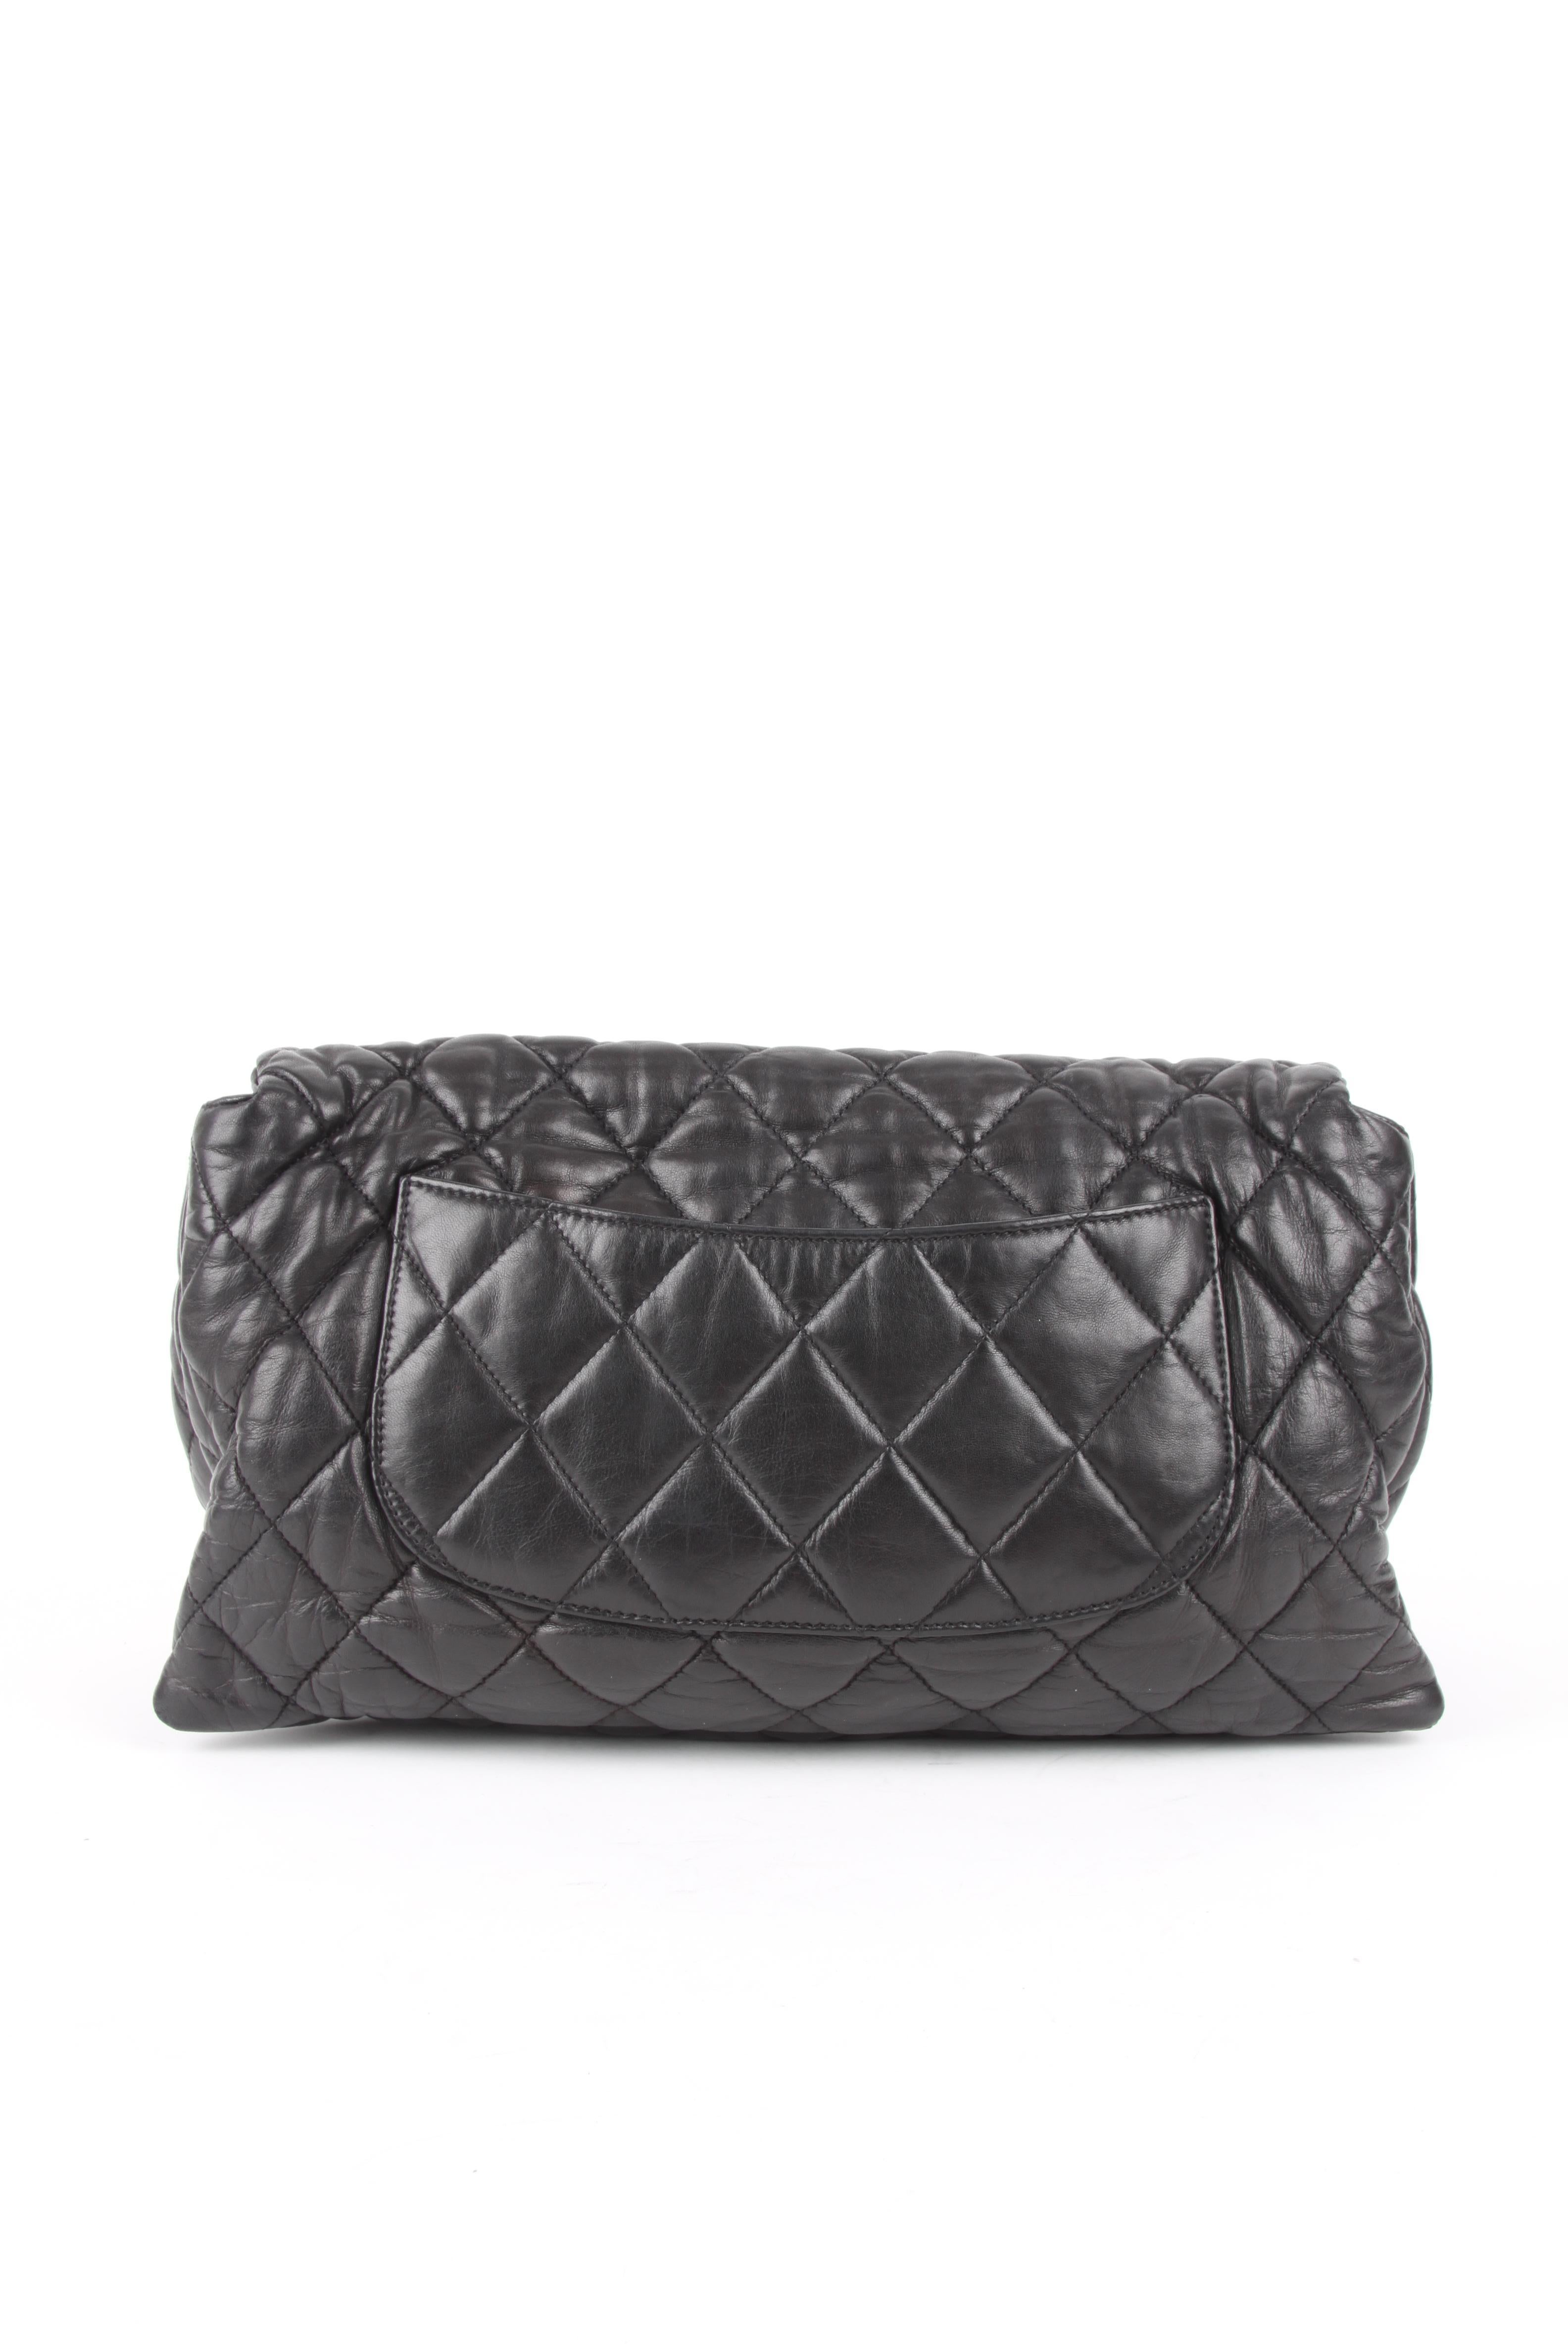 Chanel 3 Quilted Accordion Lambskin Maxi Flap Bag 1